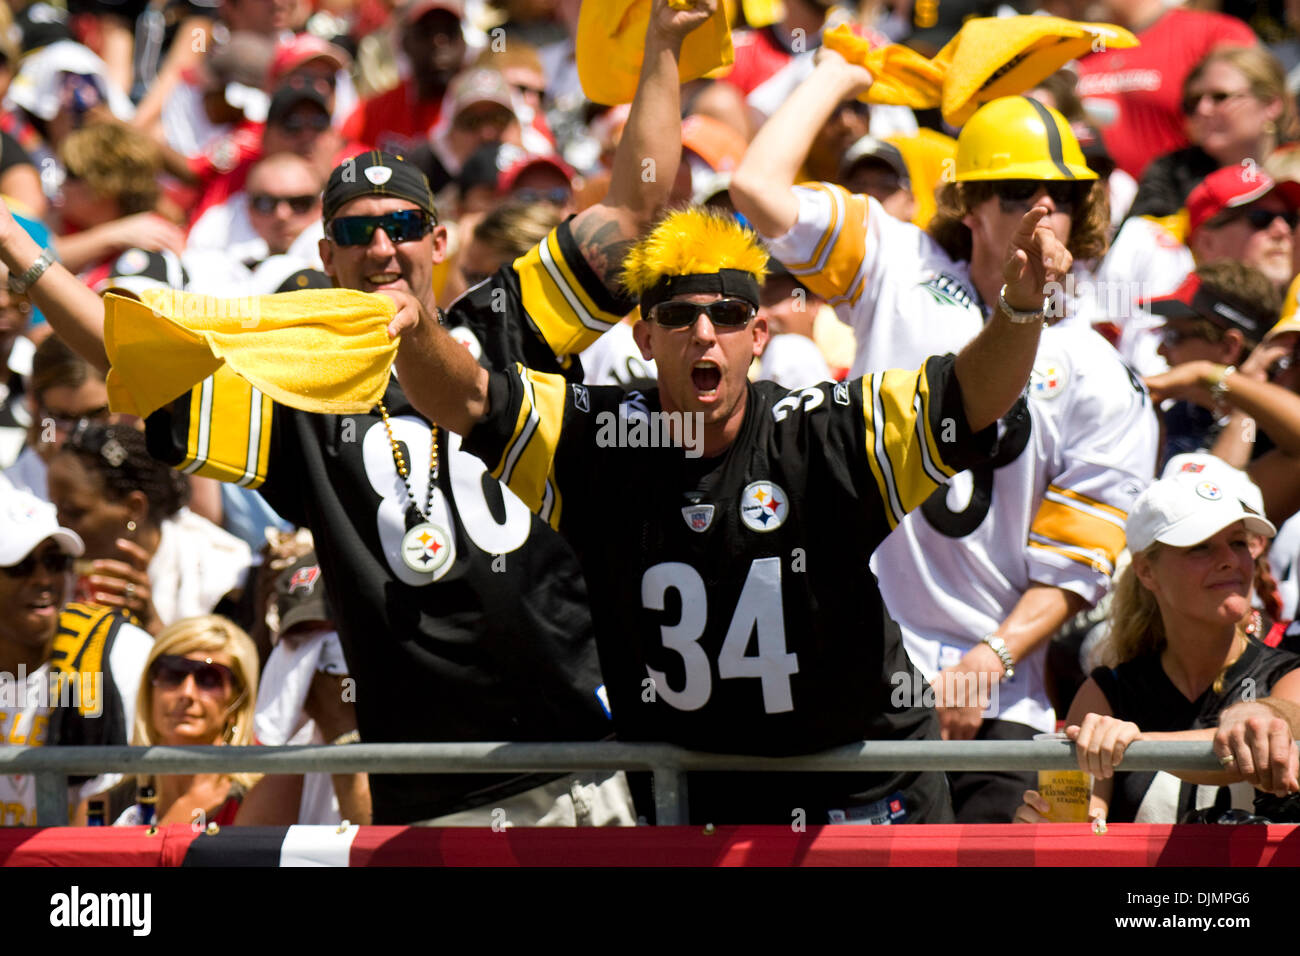 Sep. 26, 2010 - Tampa, Florida, United States of America - Pittsburgh Steelers fanatics cheering their team on against the Tampa Bay Buccaneers. The Tampa Buccaneers fall to the Pittsburgh Steelers 38-13 at Raymond James Stadium in Tampa, Florida. (Credit Image: © Anthony Smith/Southcreek Global/ZUMApress.com) Stock Photo